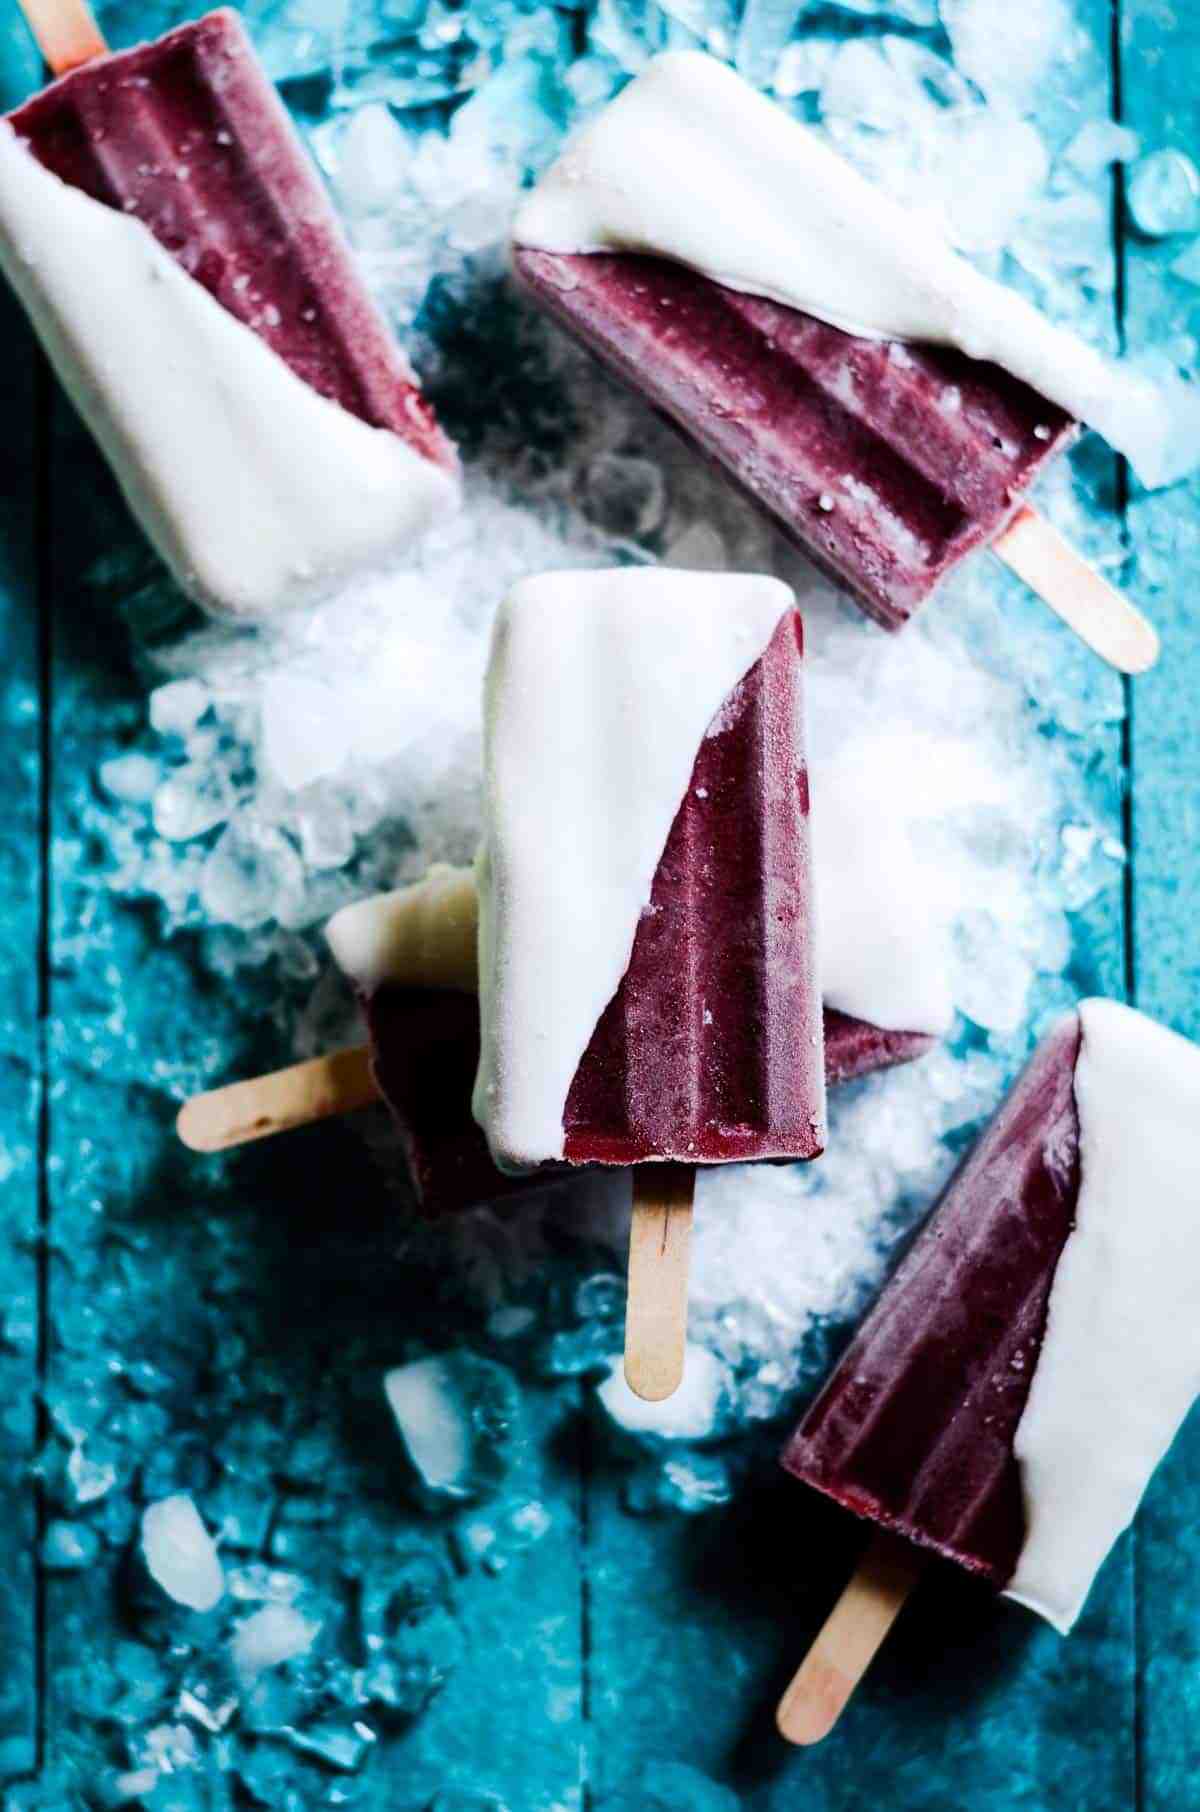 Cherry popsicles on a blue table surface.